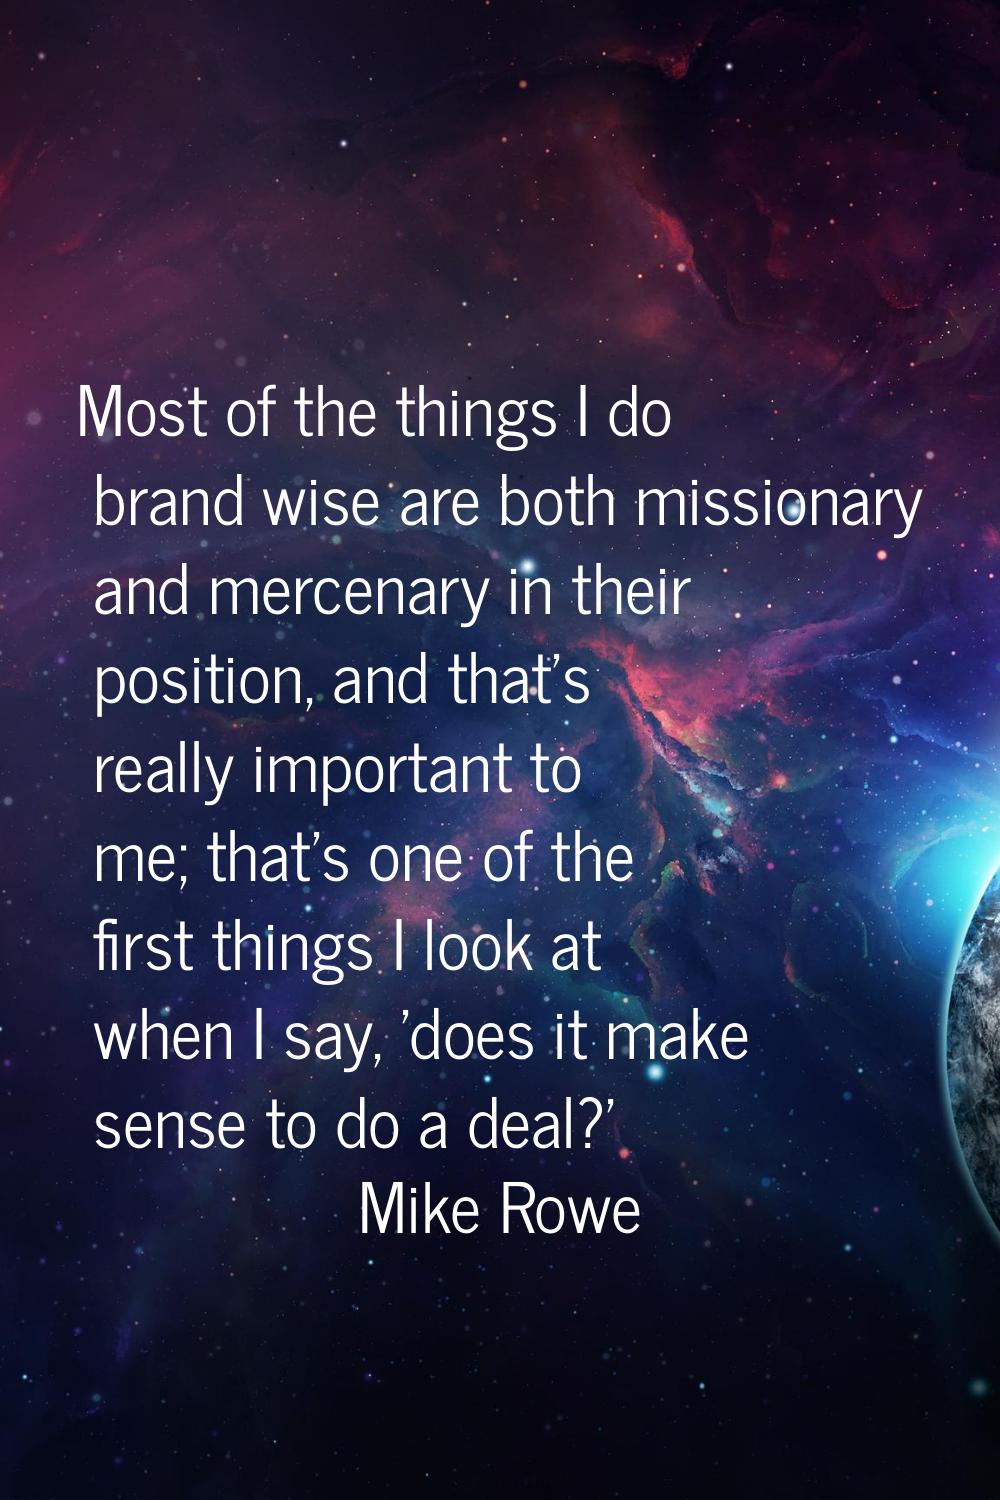 Most of the things I do brand wise are both missionary and mercenary in their position, and that's 